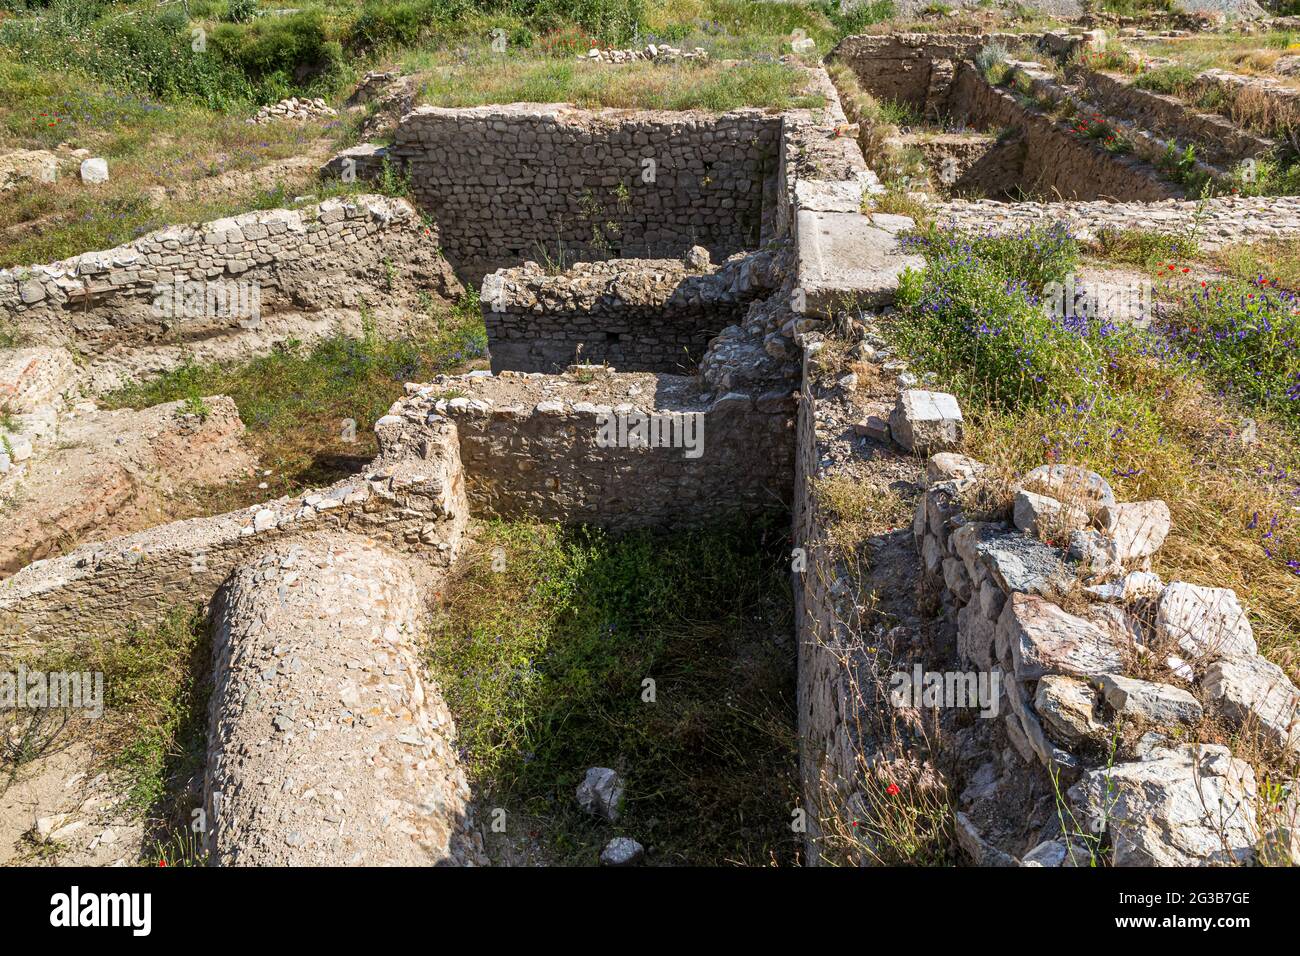 The excavation site of the ancient city of Heraclea Sintica near Petrich, Bulgaria. Heraclea Sintica was founded around 300 BC by Cassander, King of the Kingdom of Macedon (r. 305-297 BC), who also founded Thessaloniki Stock Photo